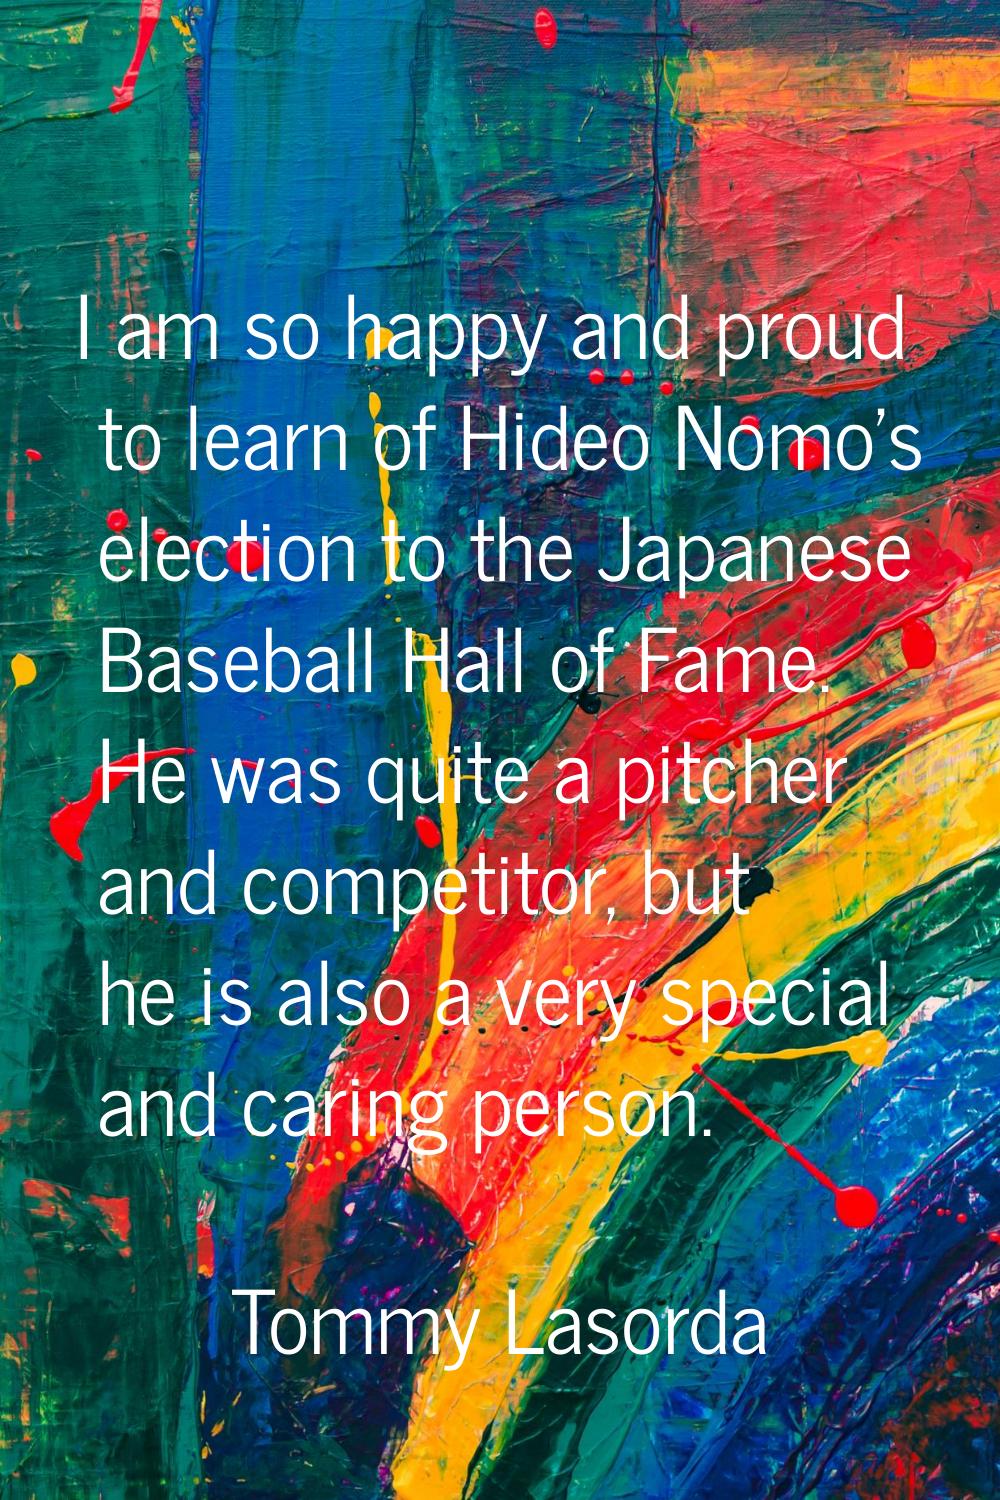 I am so happy and proud to learn of Hideo Nomo's election to the Japanese Baseball Hall of Fame. He